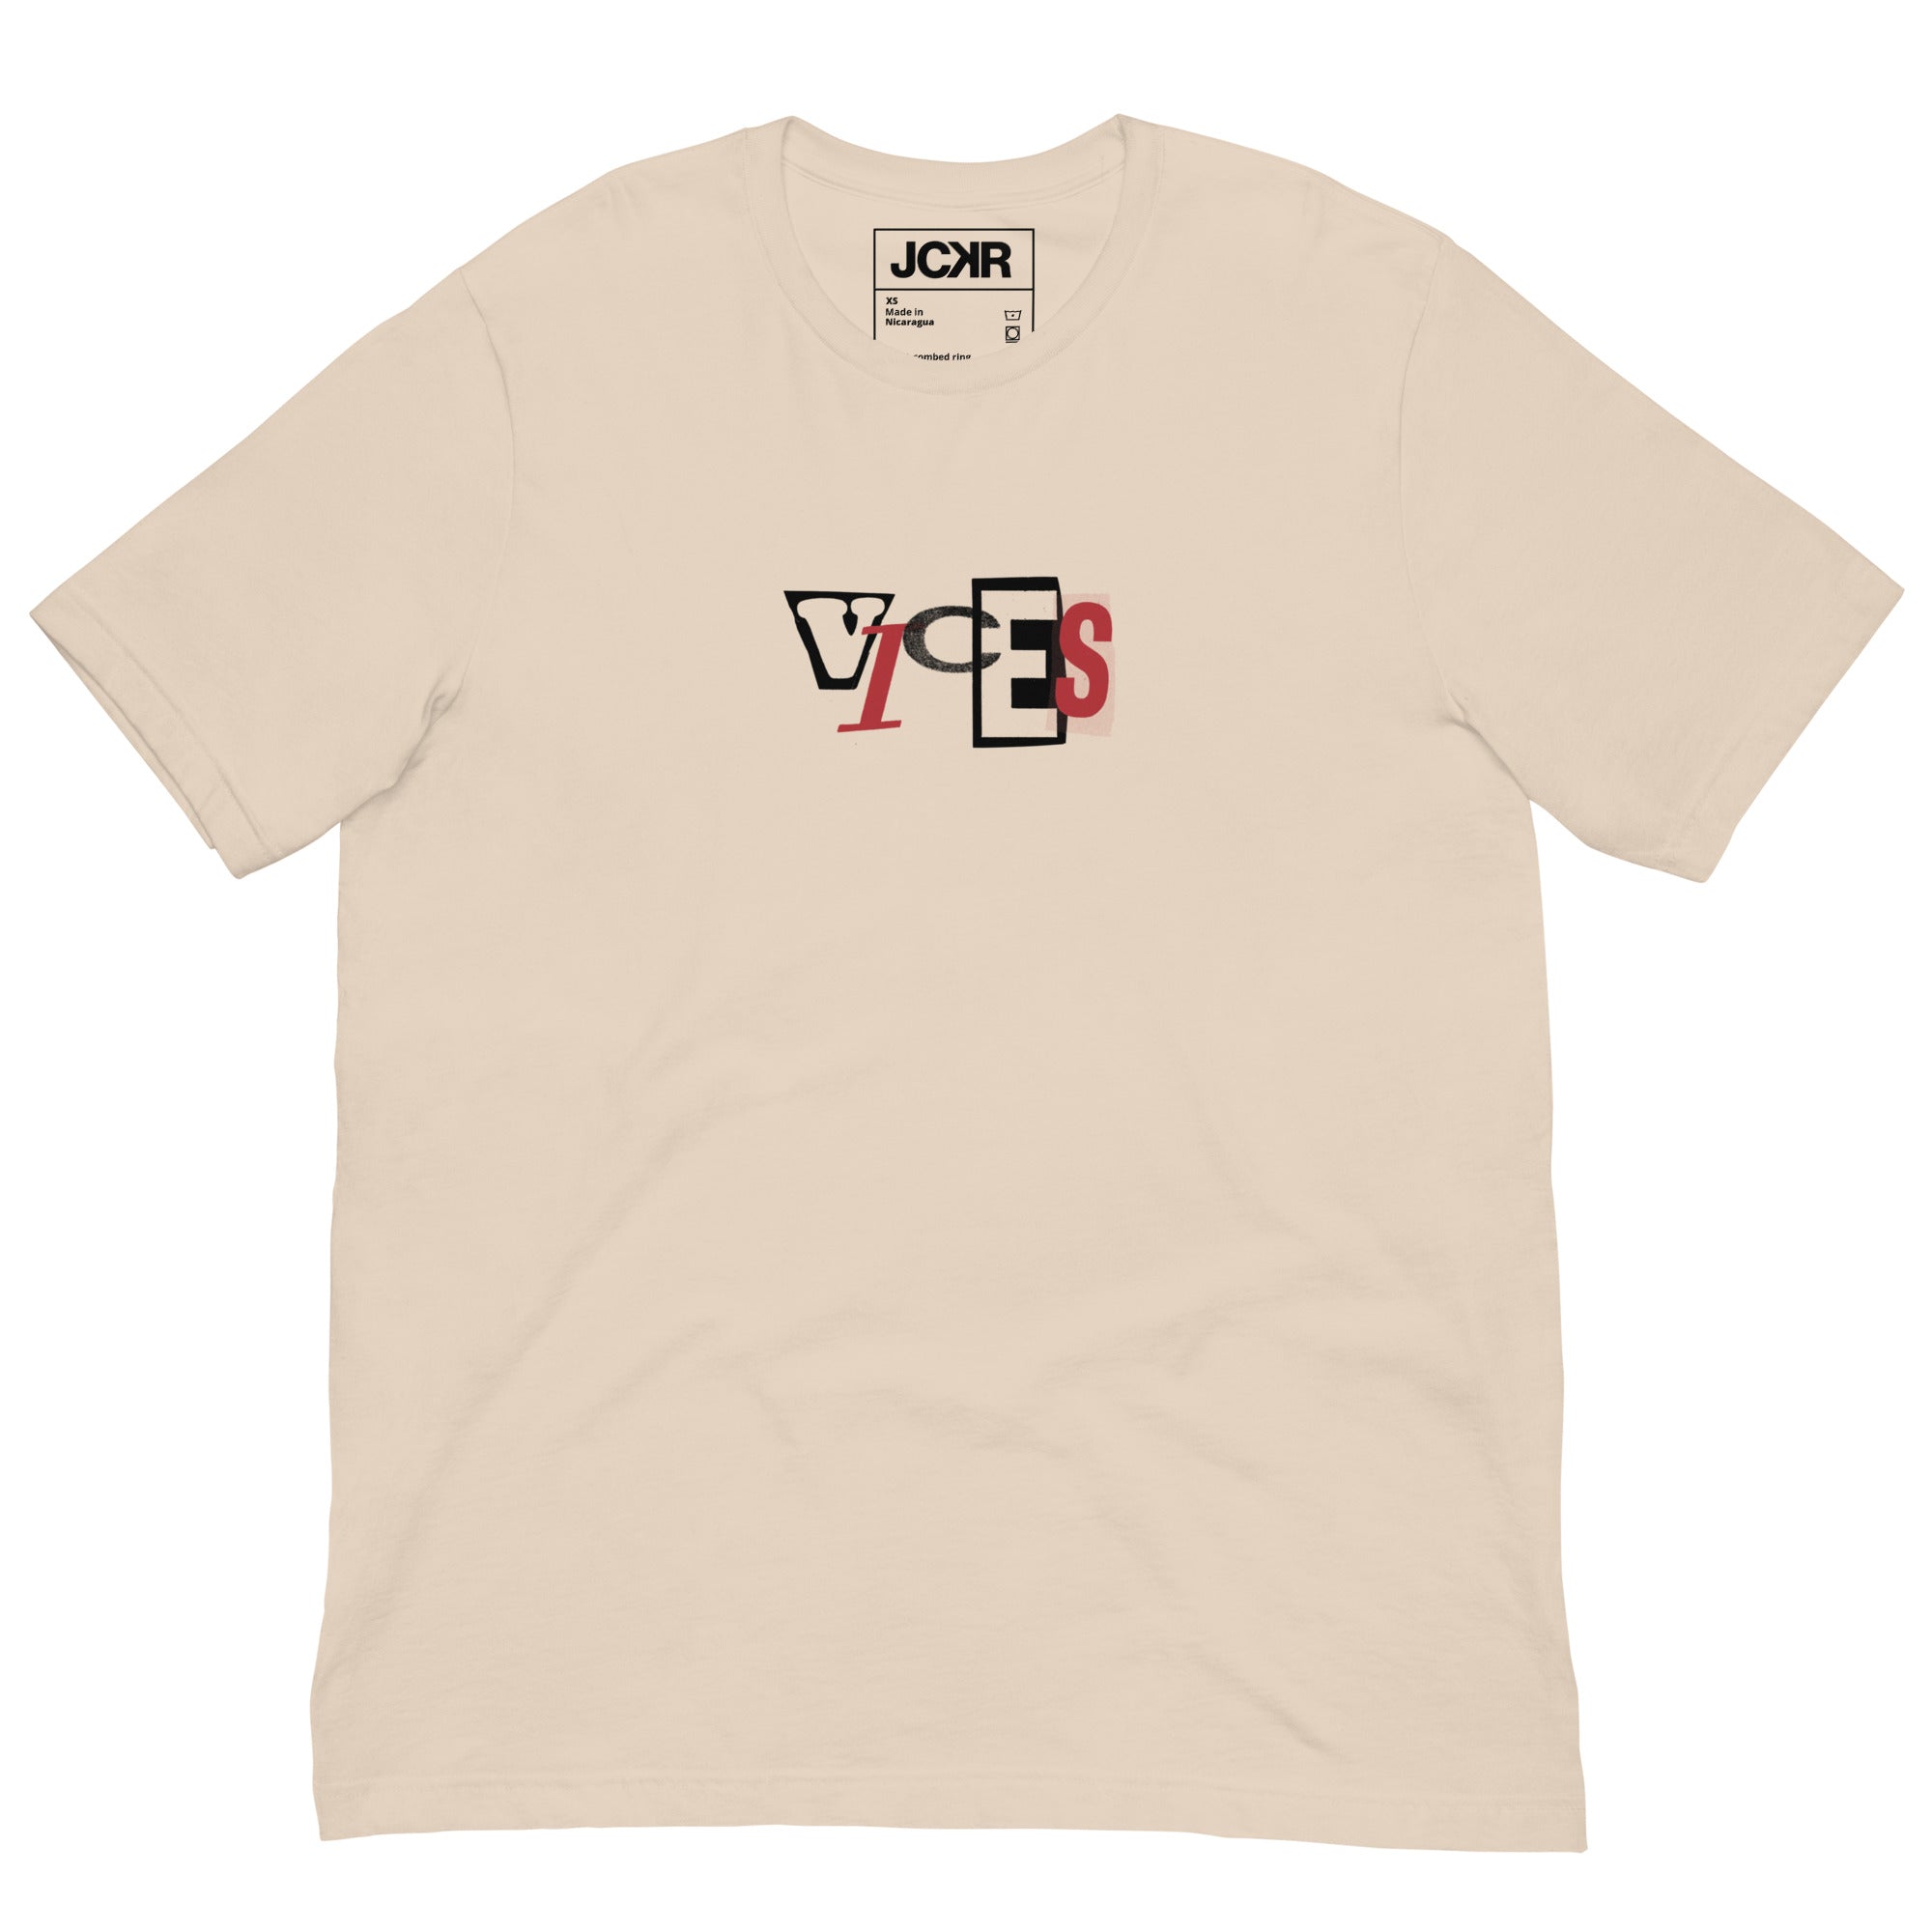 VICES • t-shirt - Jackler - anime-inspired streetwear - anime clothing